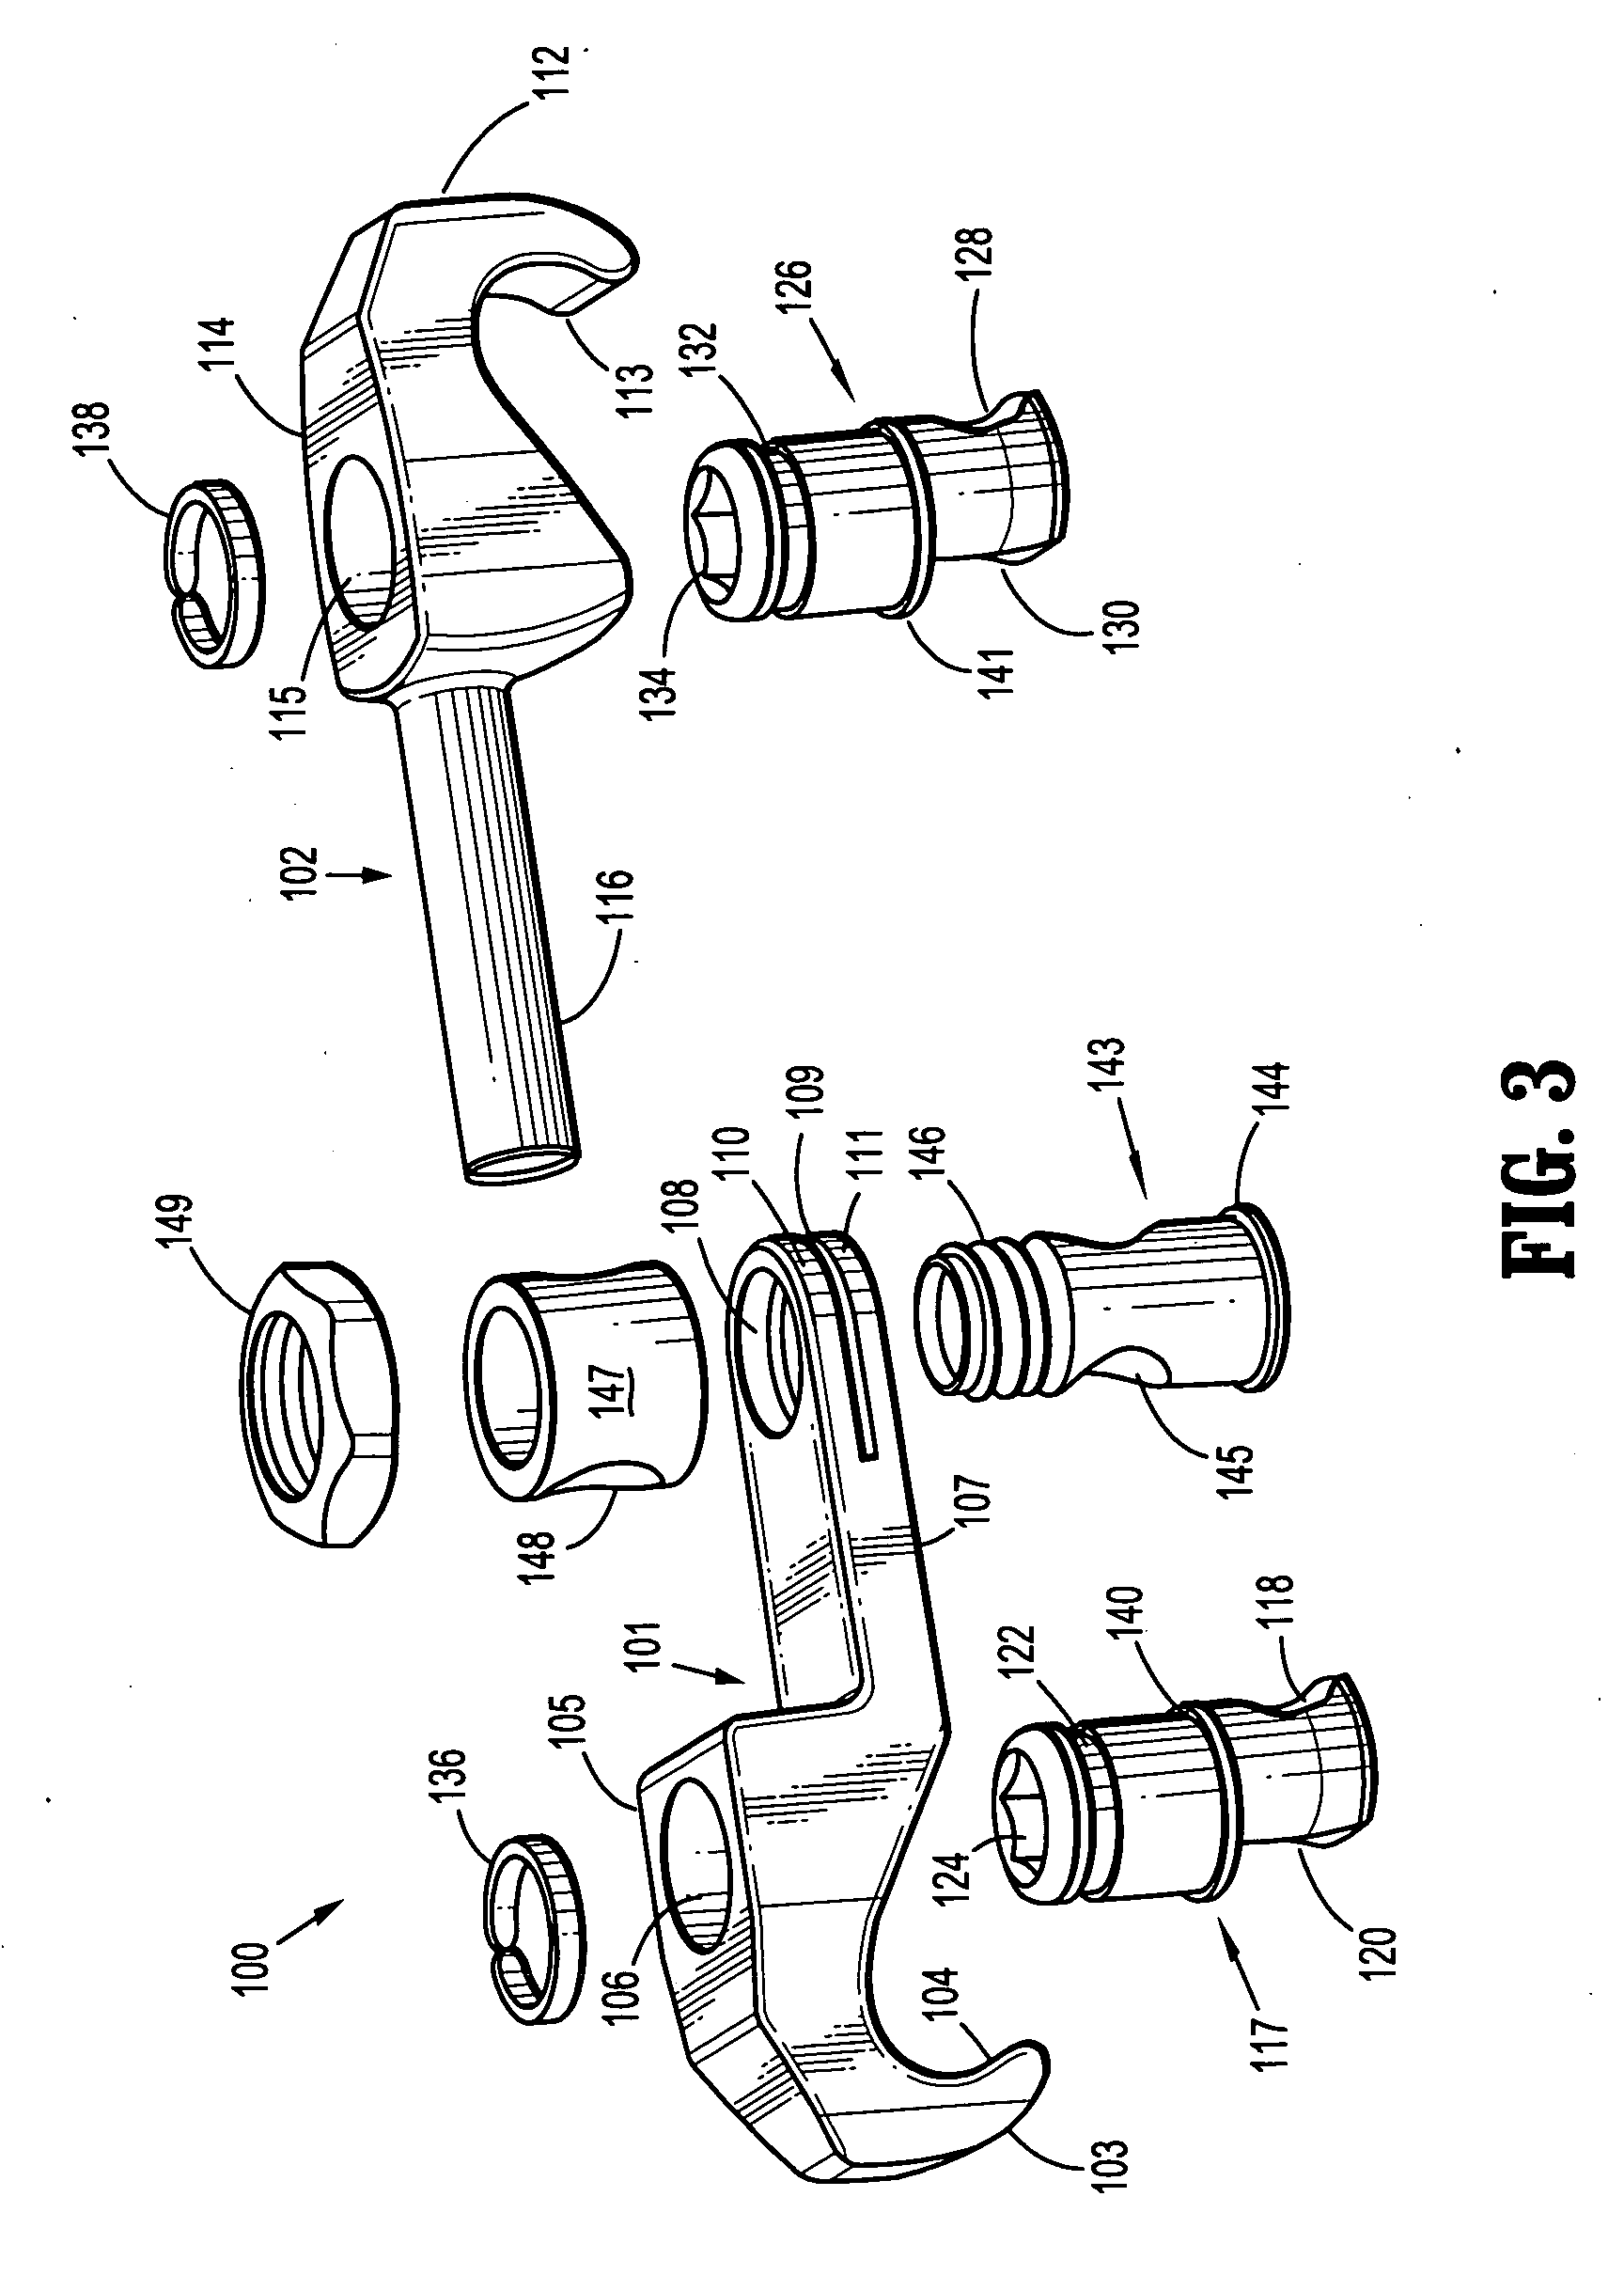 Center locking cross-connector with eccentric cam rod engagement